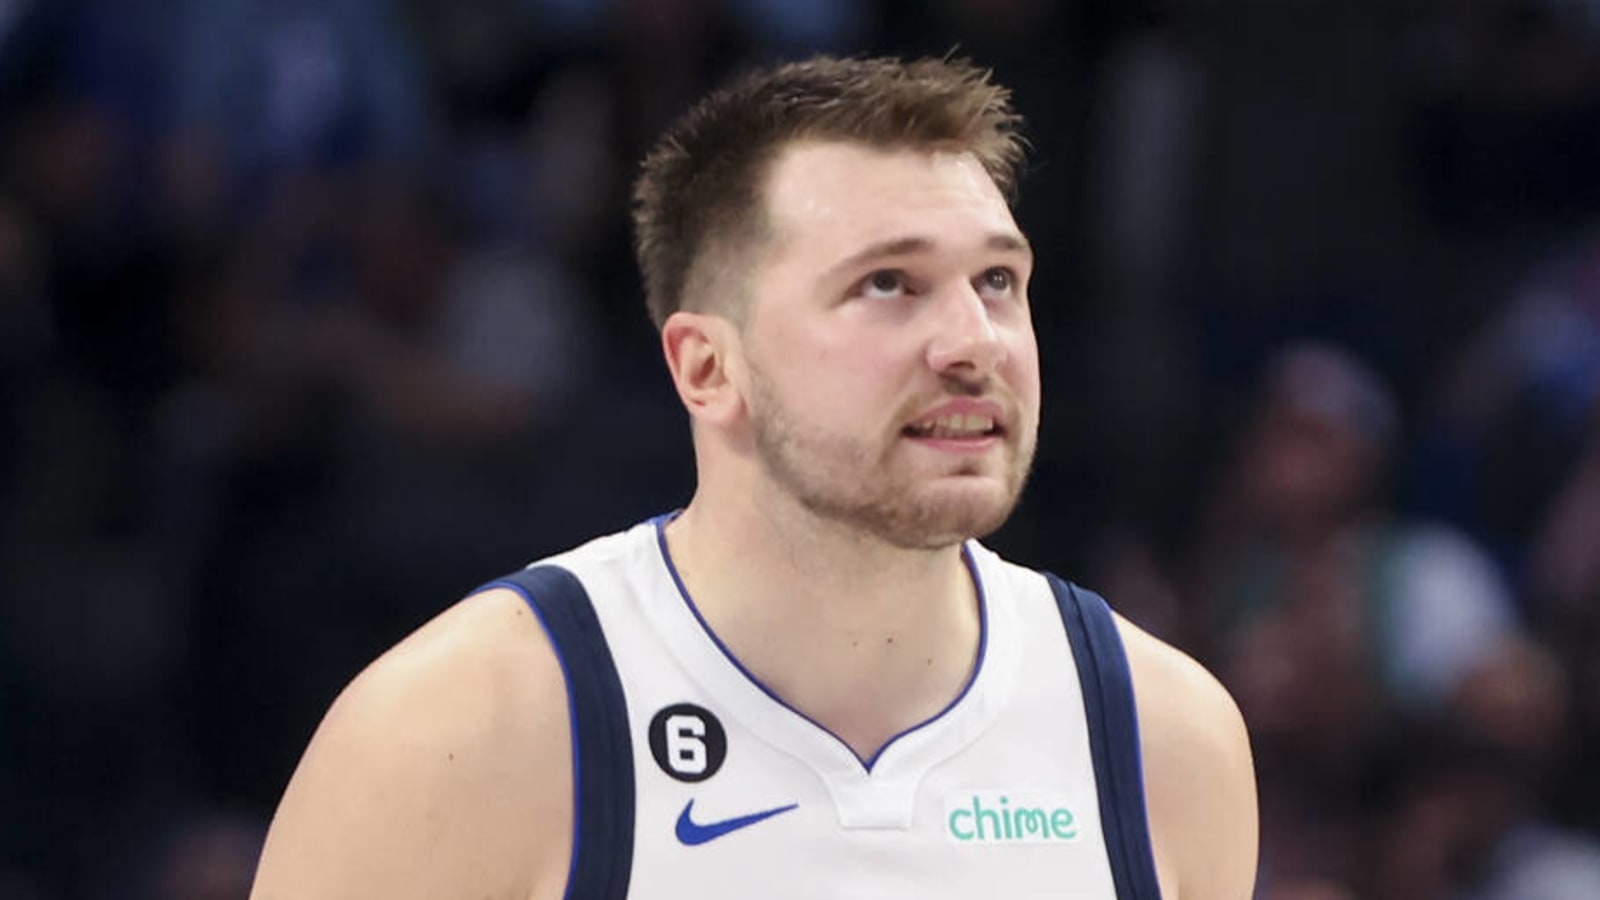 Doncic is first to score over 30 points in first seven games since Chamberlain